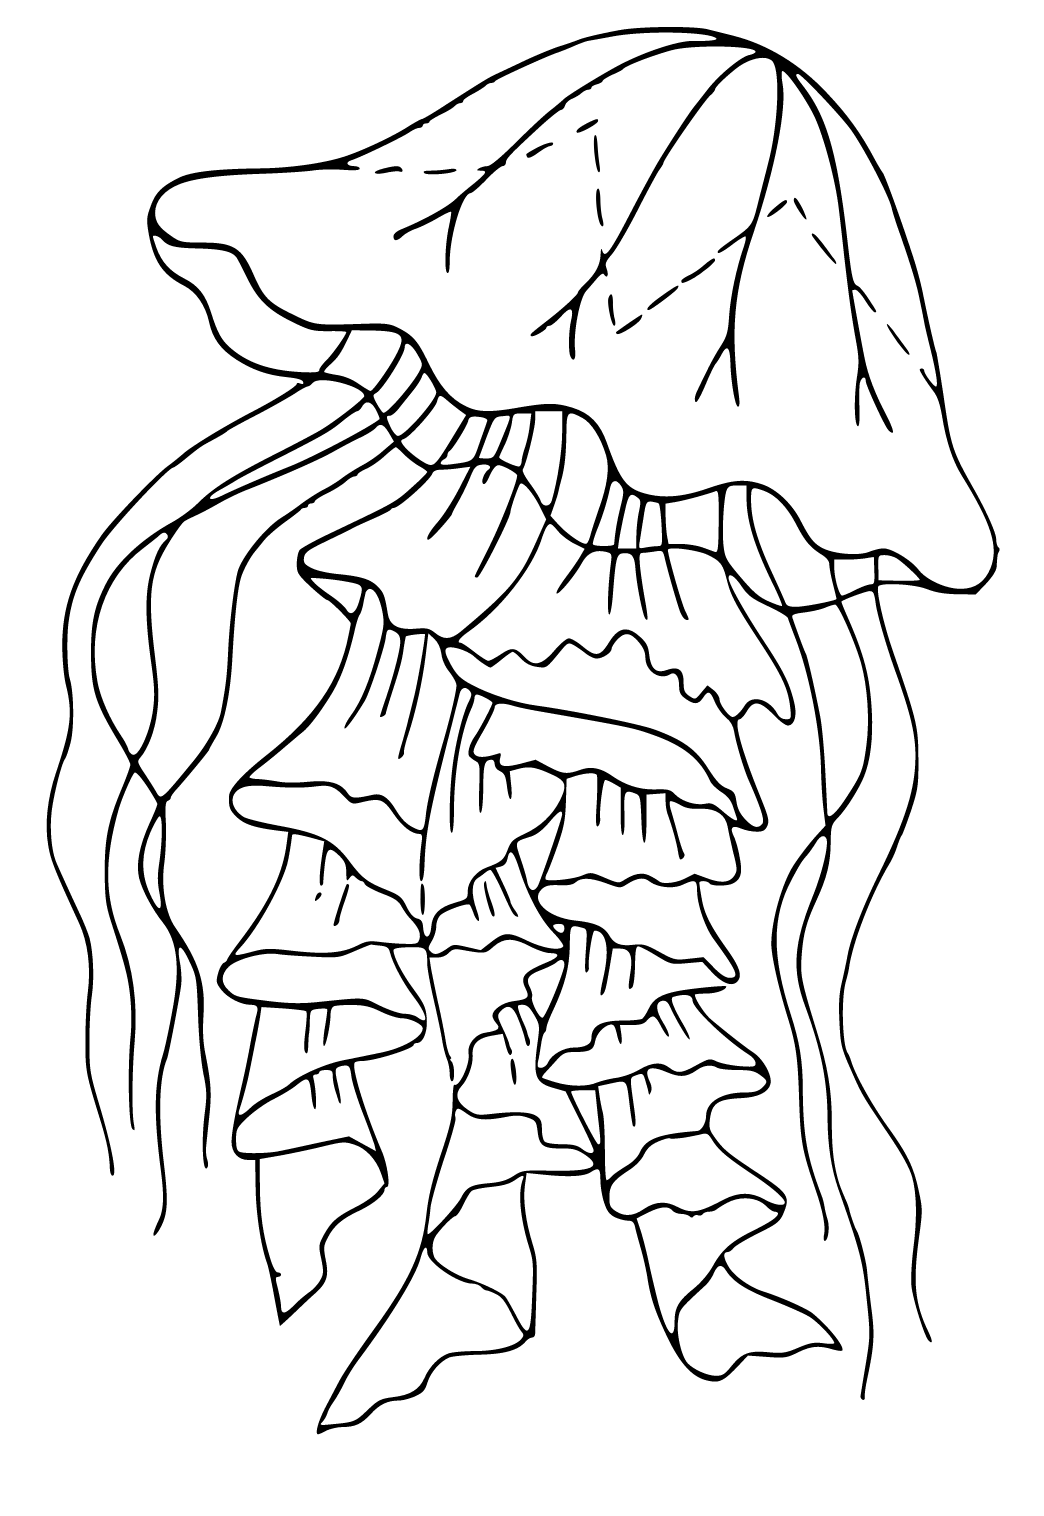 jelly fish coloring page